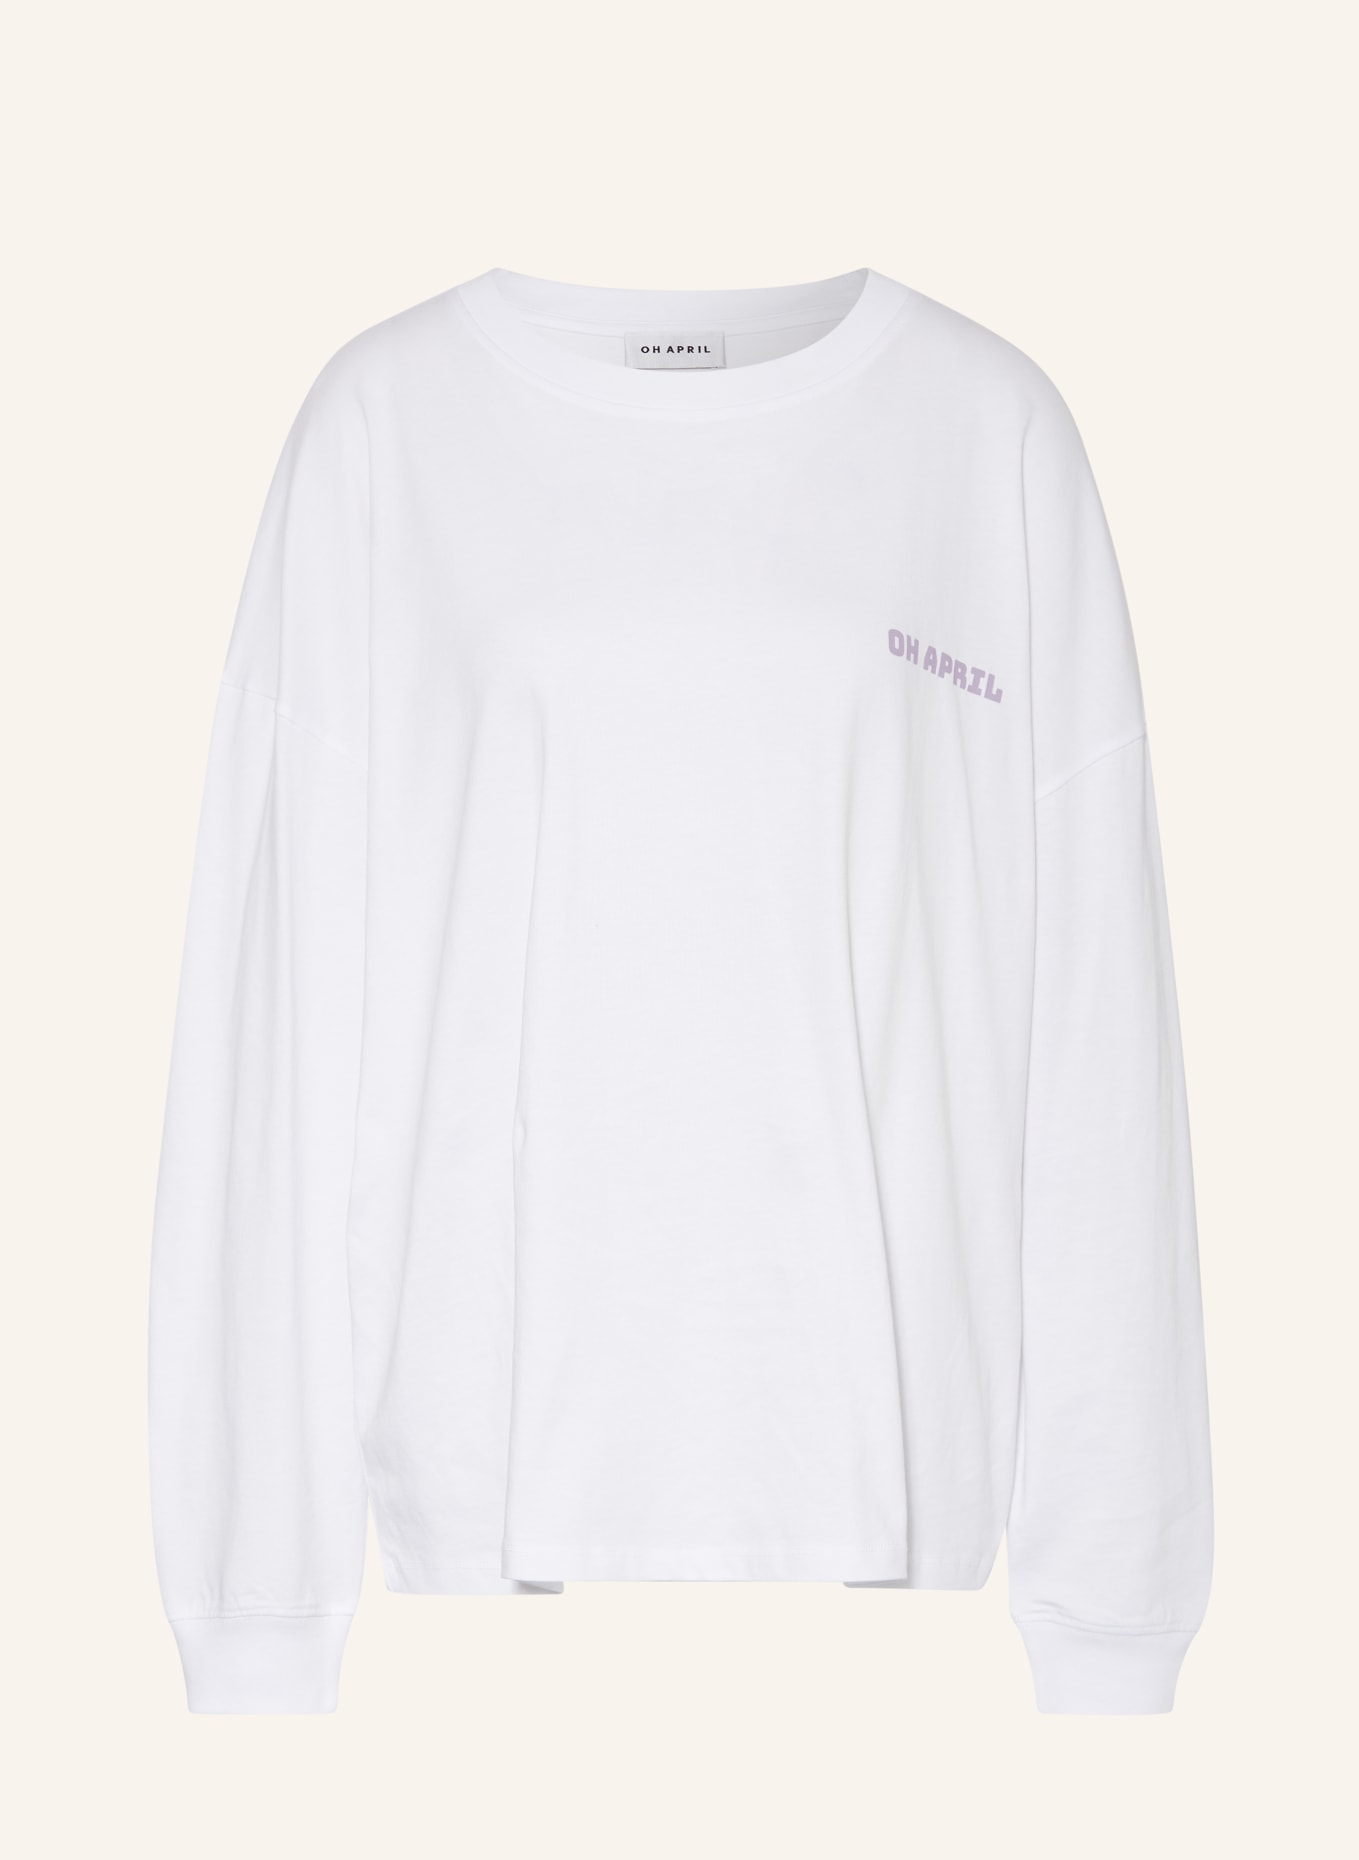 OH APRIL Oversized long sleeve shirt COSMIC LOVE, Color: WHITE/ PURPLE (Image 1)